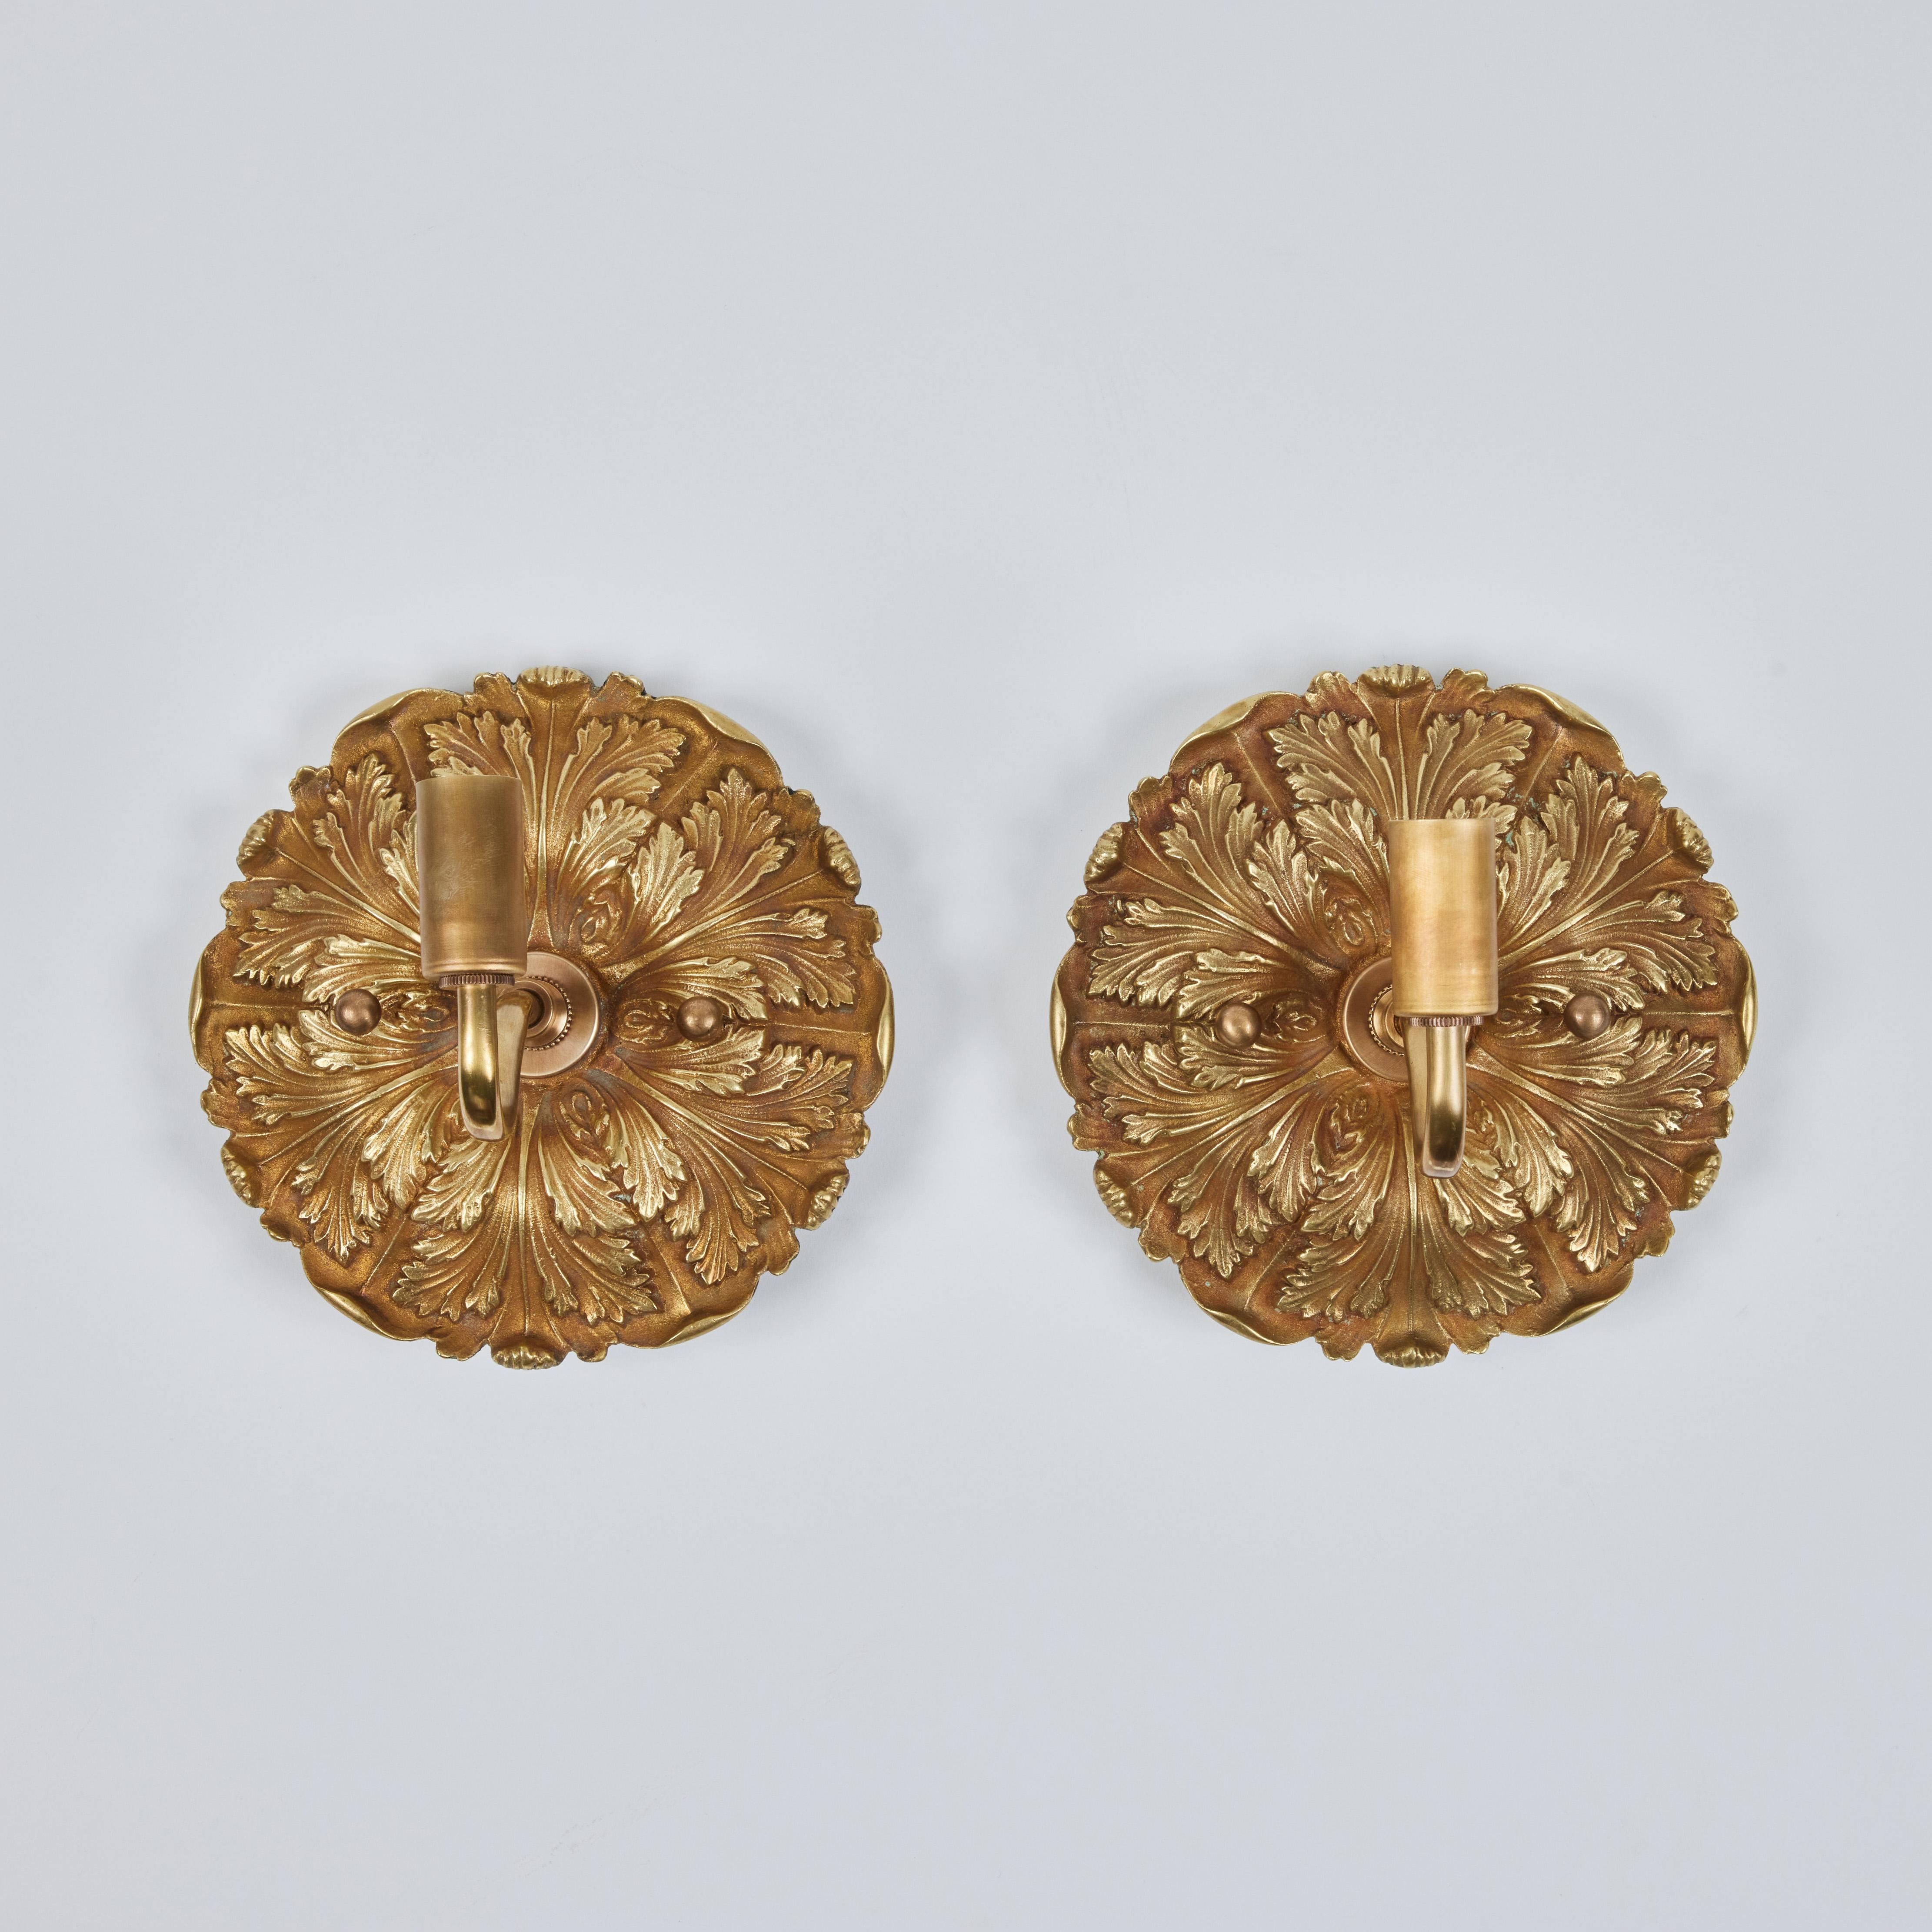 Pair of Vintage Brass Sconces In Good Condition For Sale In Pasadena, CA